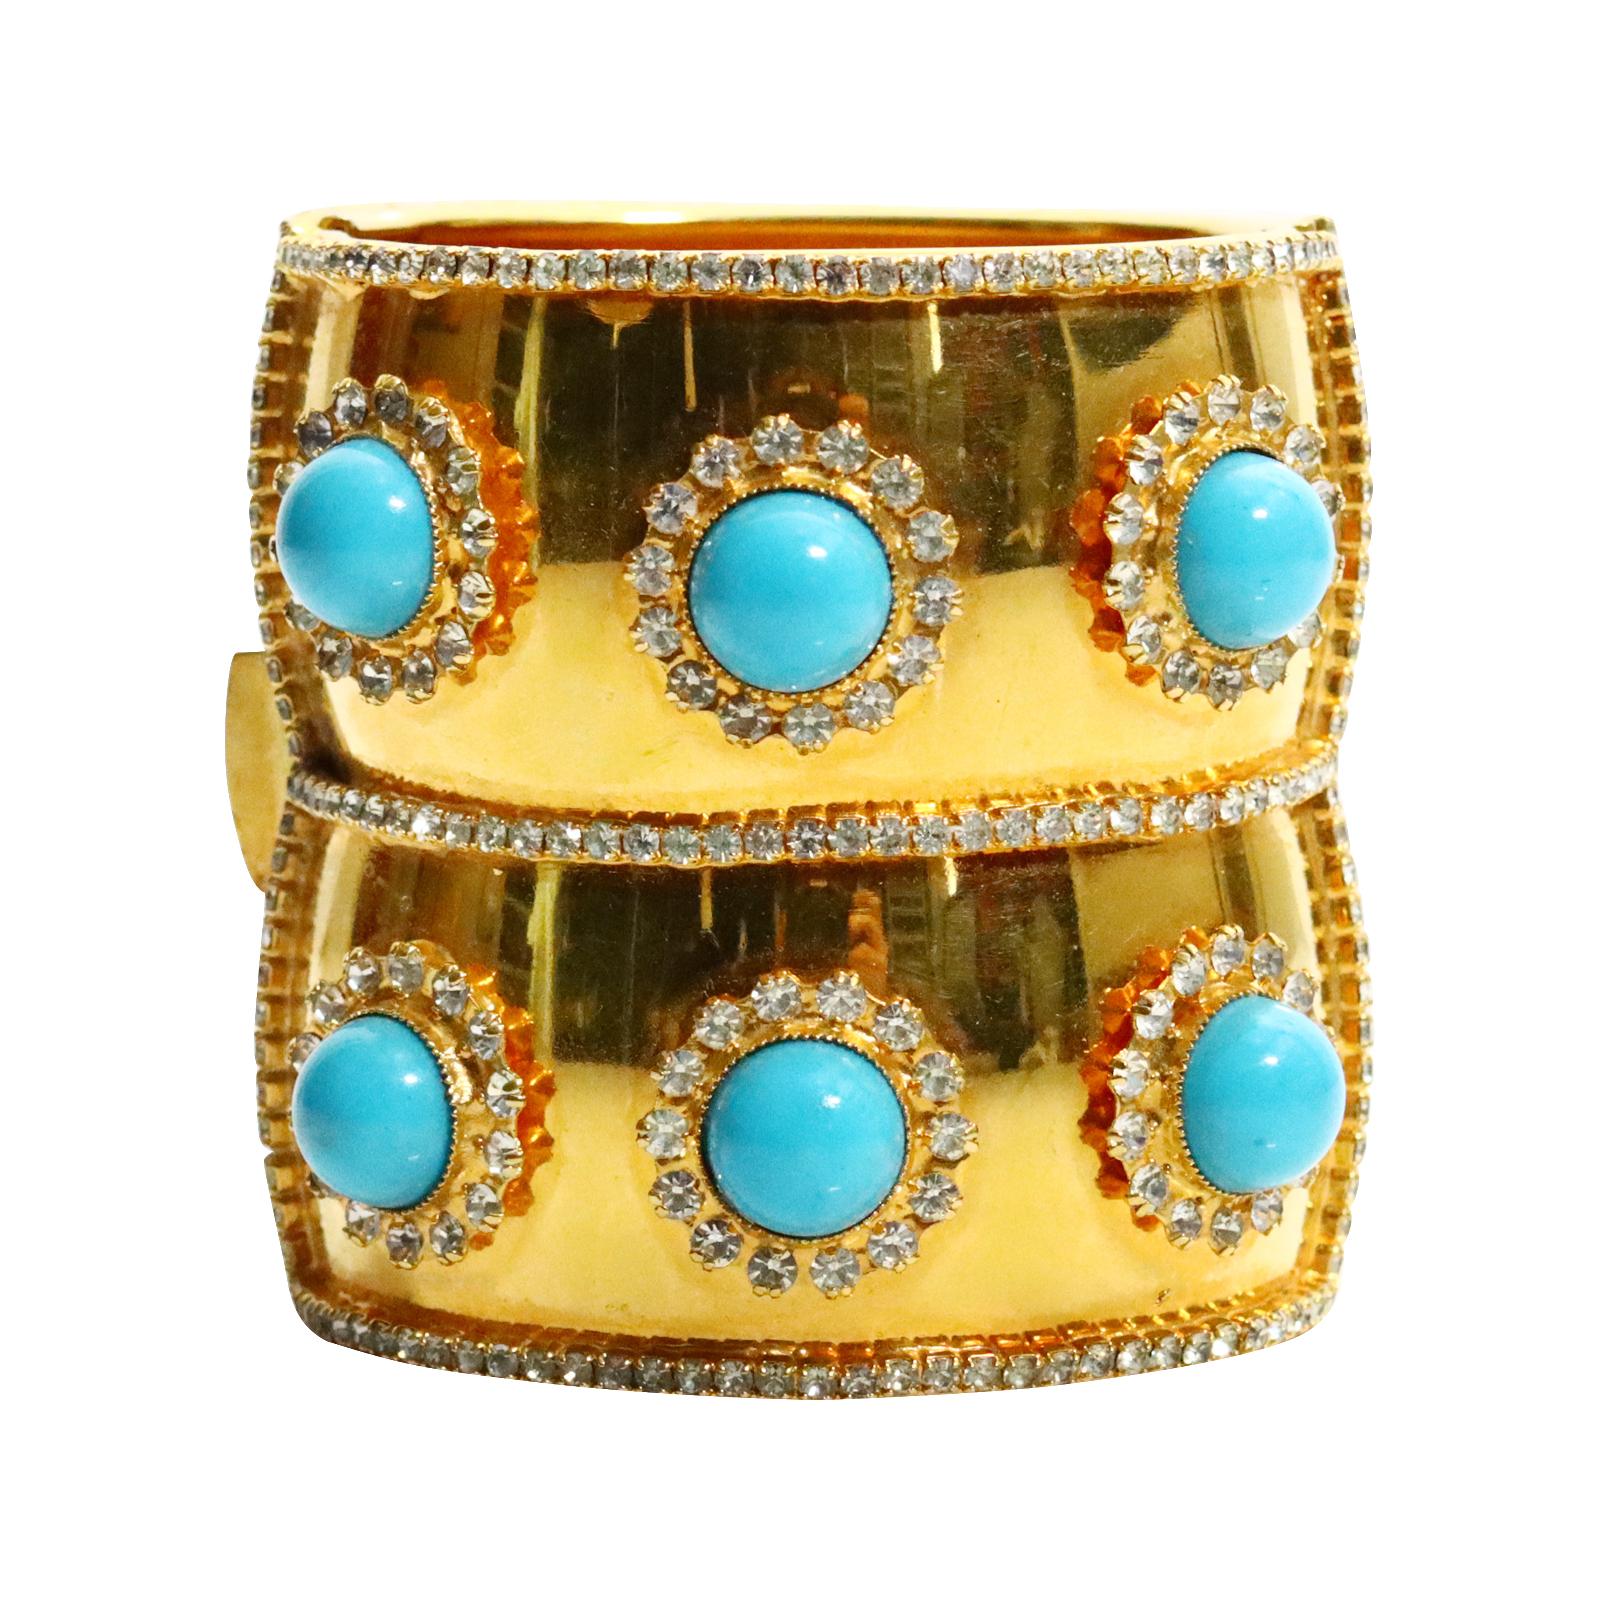 Vintage deLillo Gold Tone Crystal with Faux Turquoise Bracelet Circa !970s For Sale 4